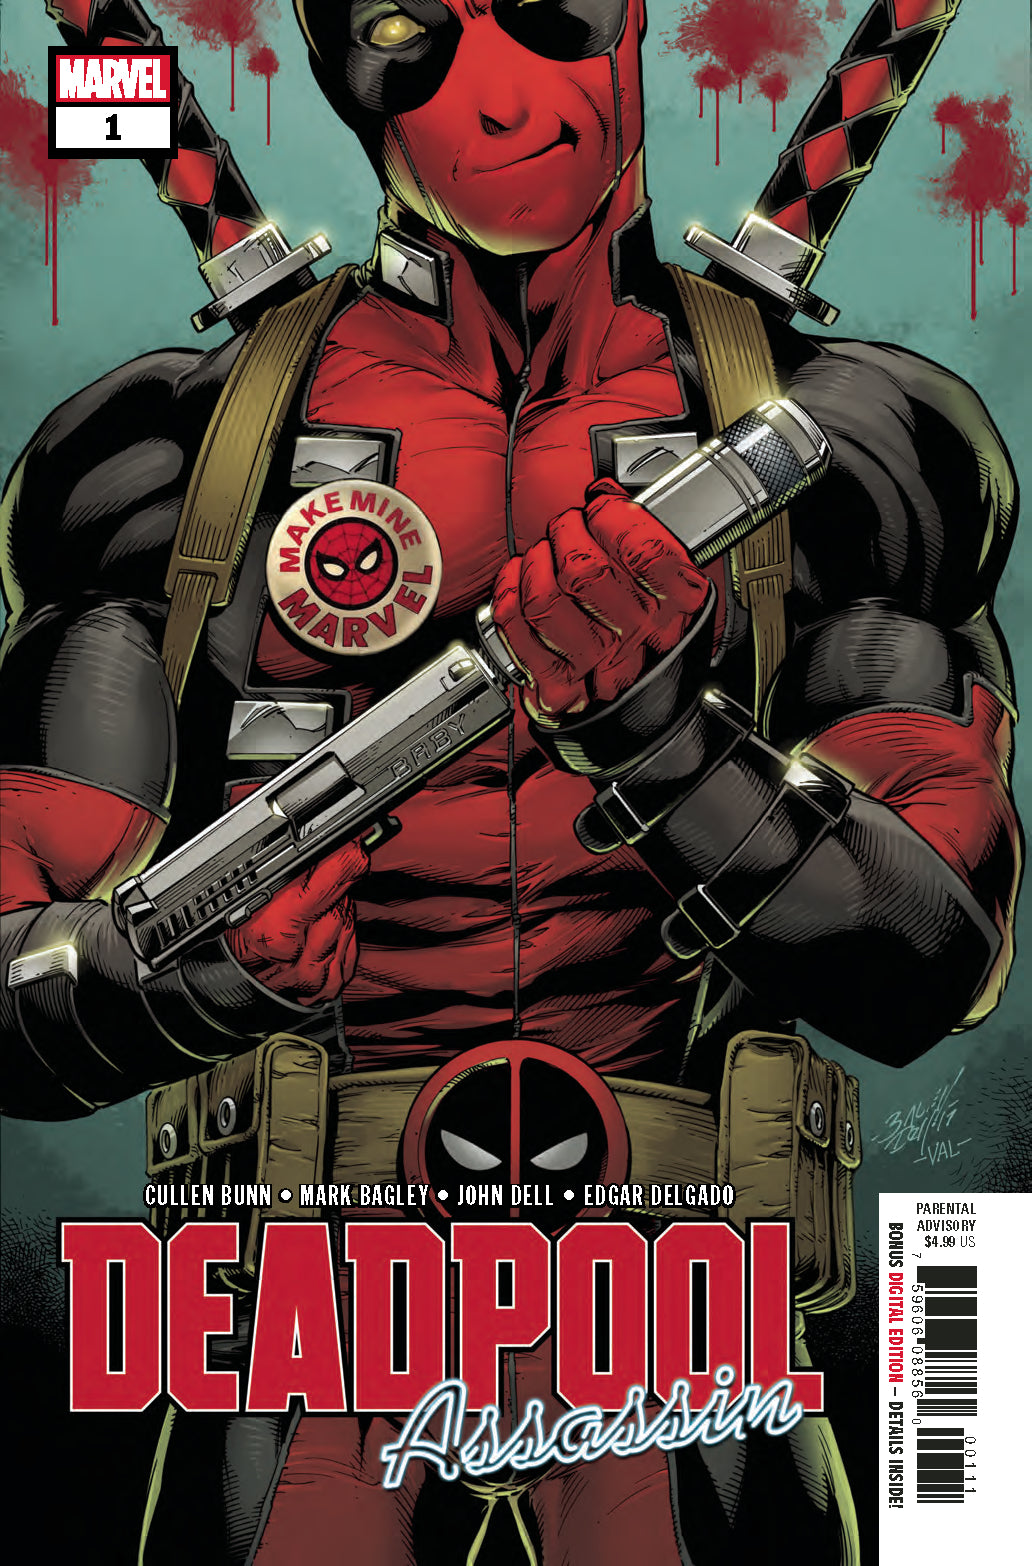 DEADPOOL ASSASSIN #1 to #6 (OF 6) | Game Master's Emporium (The New GME)